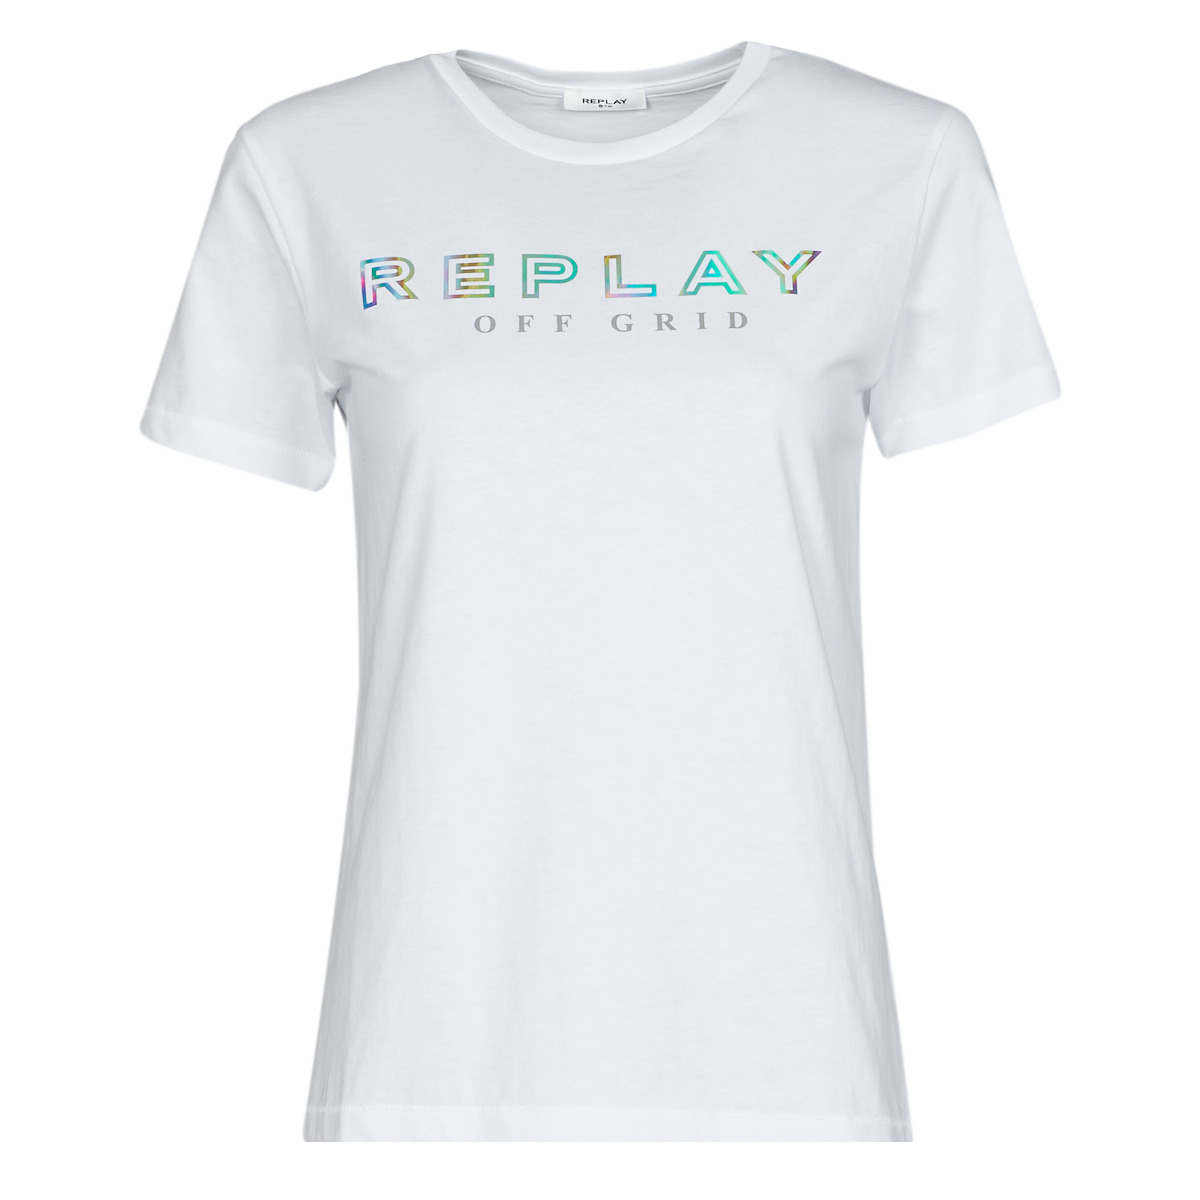 Replay W3318C € Women delivery ! White Clothing short-sleeved t-shirts - Spartoo 43,20 - Europe | Fast